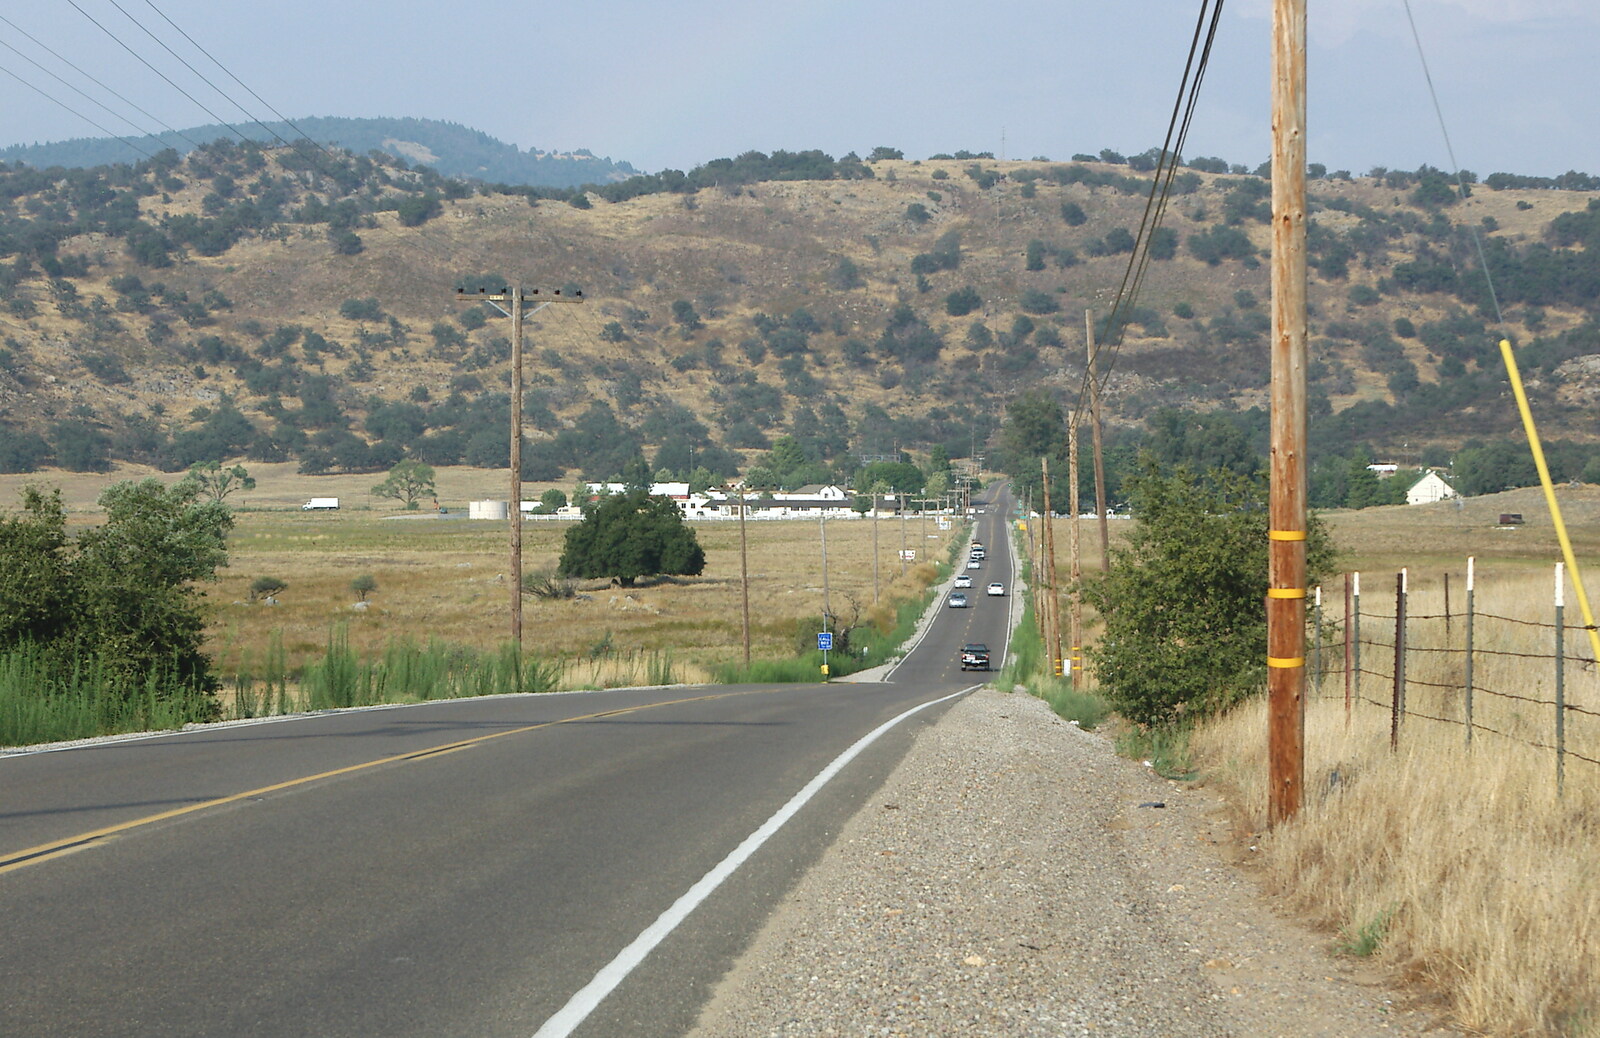 R-78 winds down into Santa Ysabel from Route 78: A Drive Around the San Diego Mountains, California, US - 9th August 2005